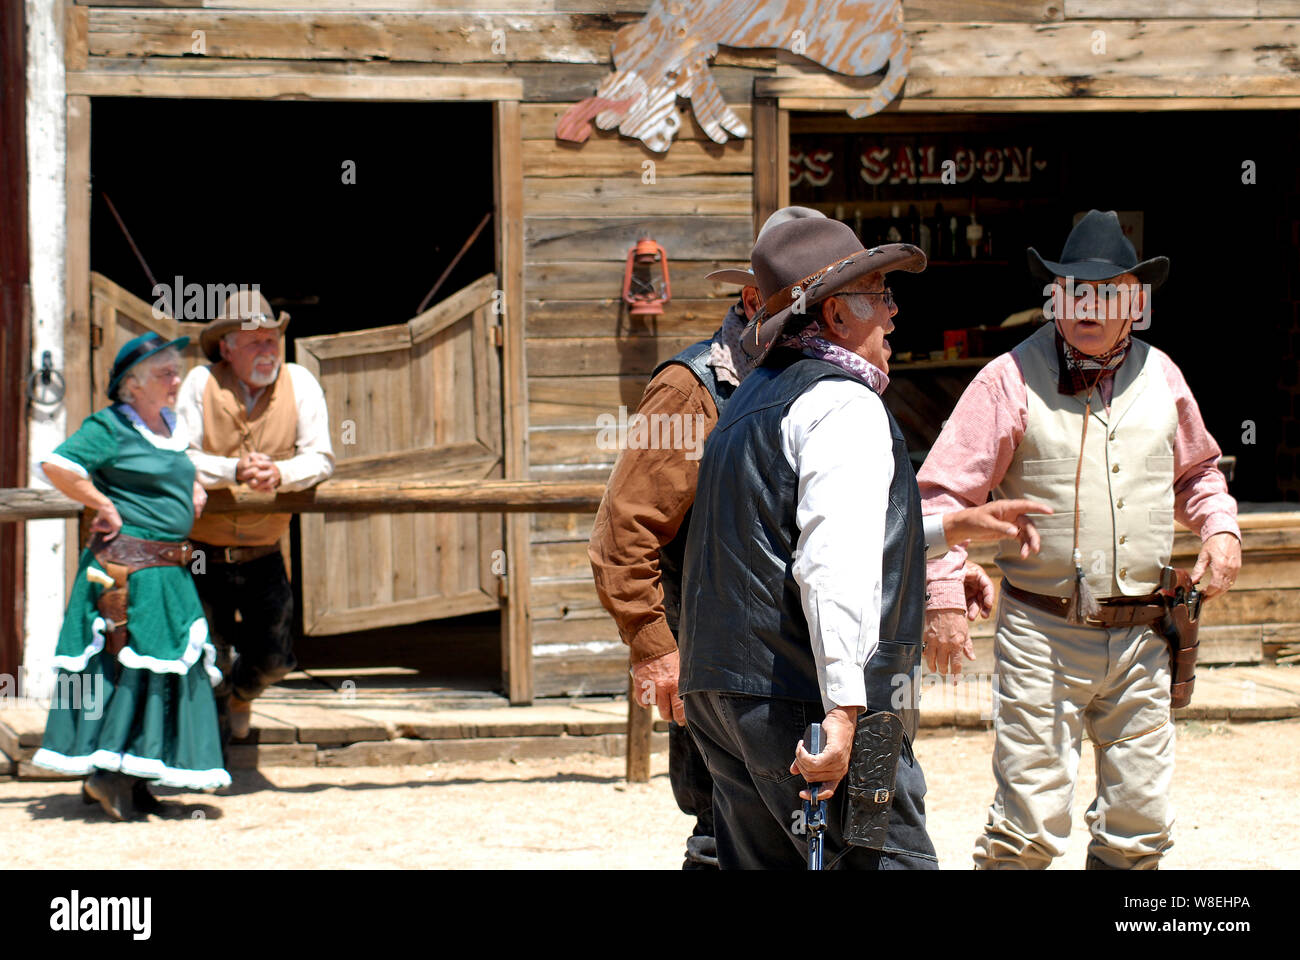 Editorial Only- The tiny, historic mining town of Chloride, Arizona puts on a mock Western shoot out twice a month using their old buildings. Stock Photo